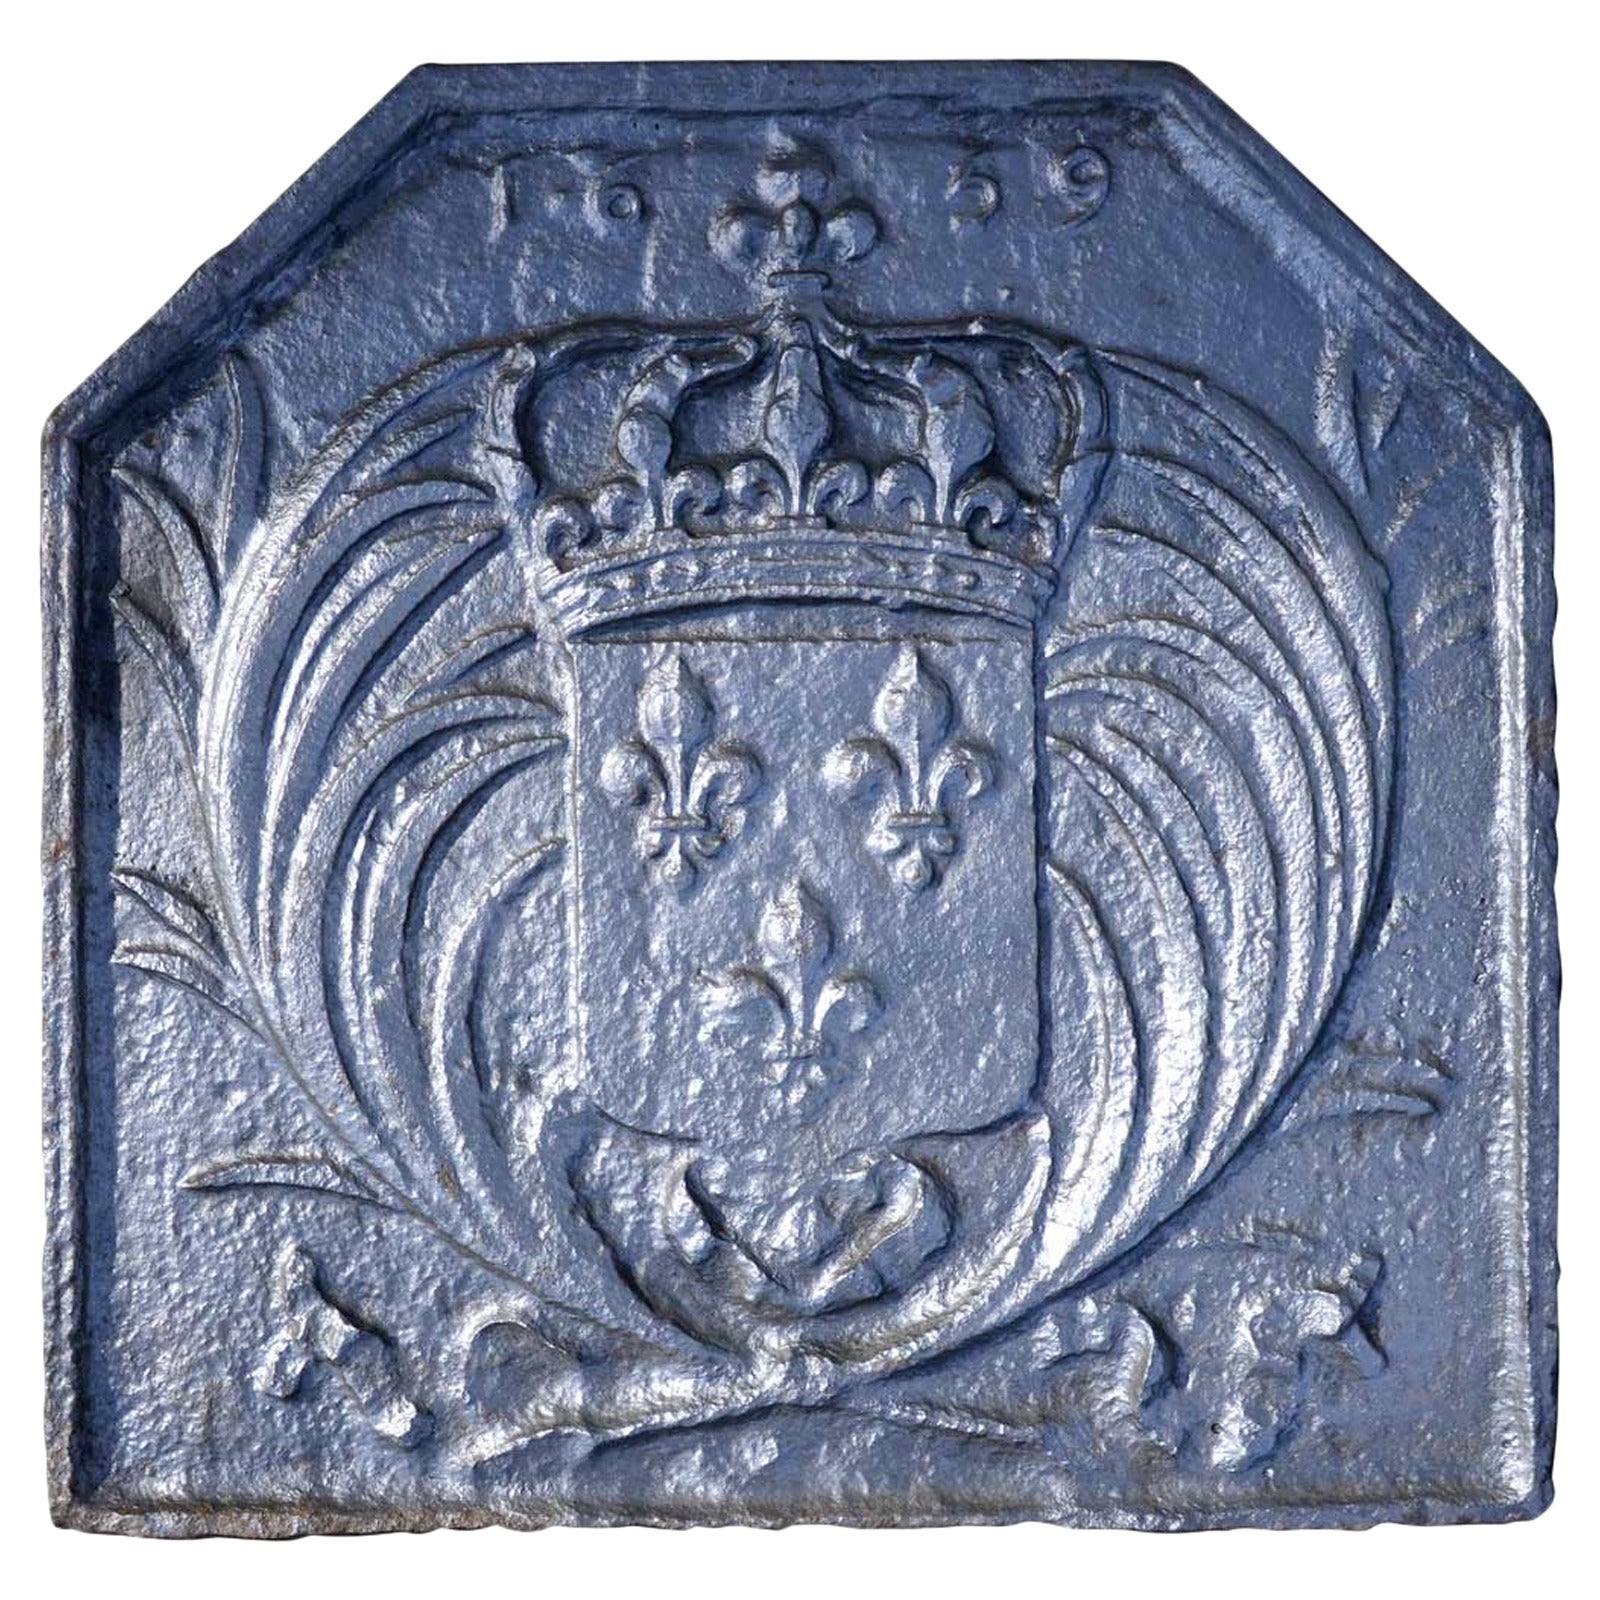 Cast Iron Fireback with the Royal Arms of France, 17th Century